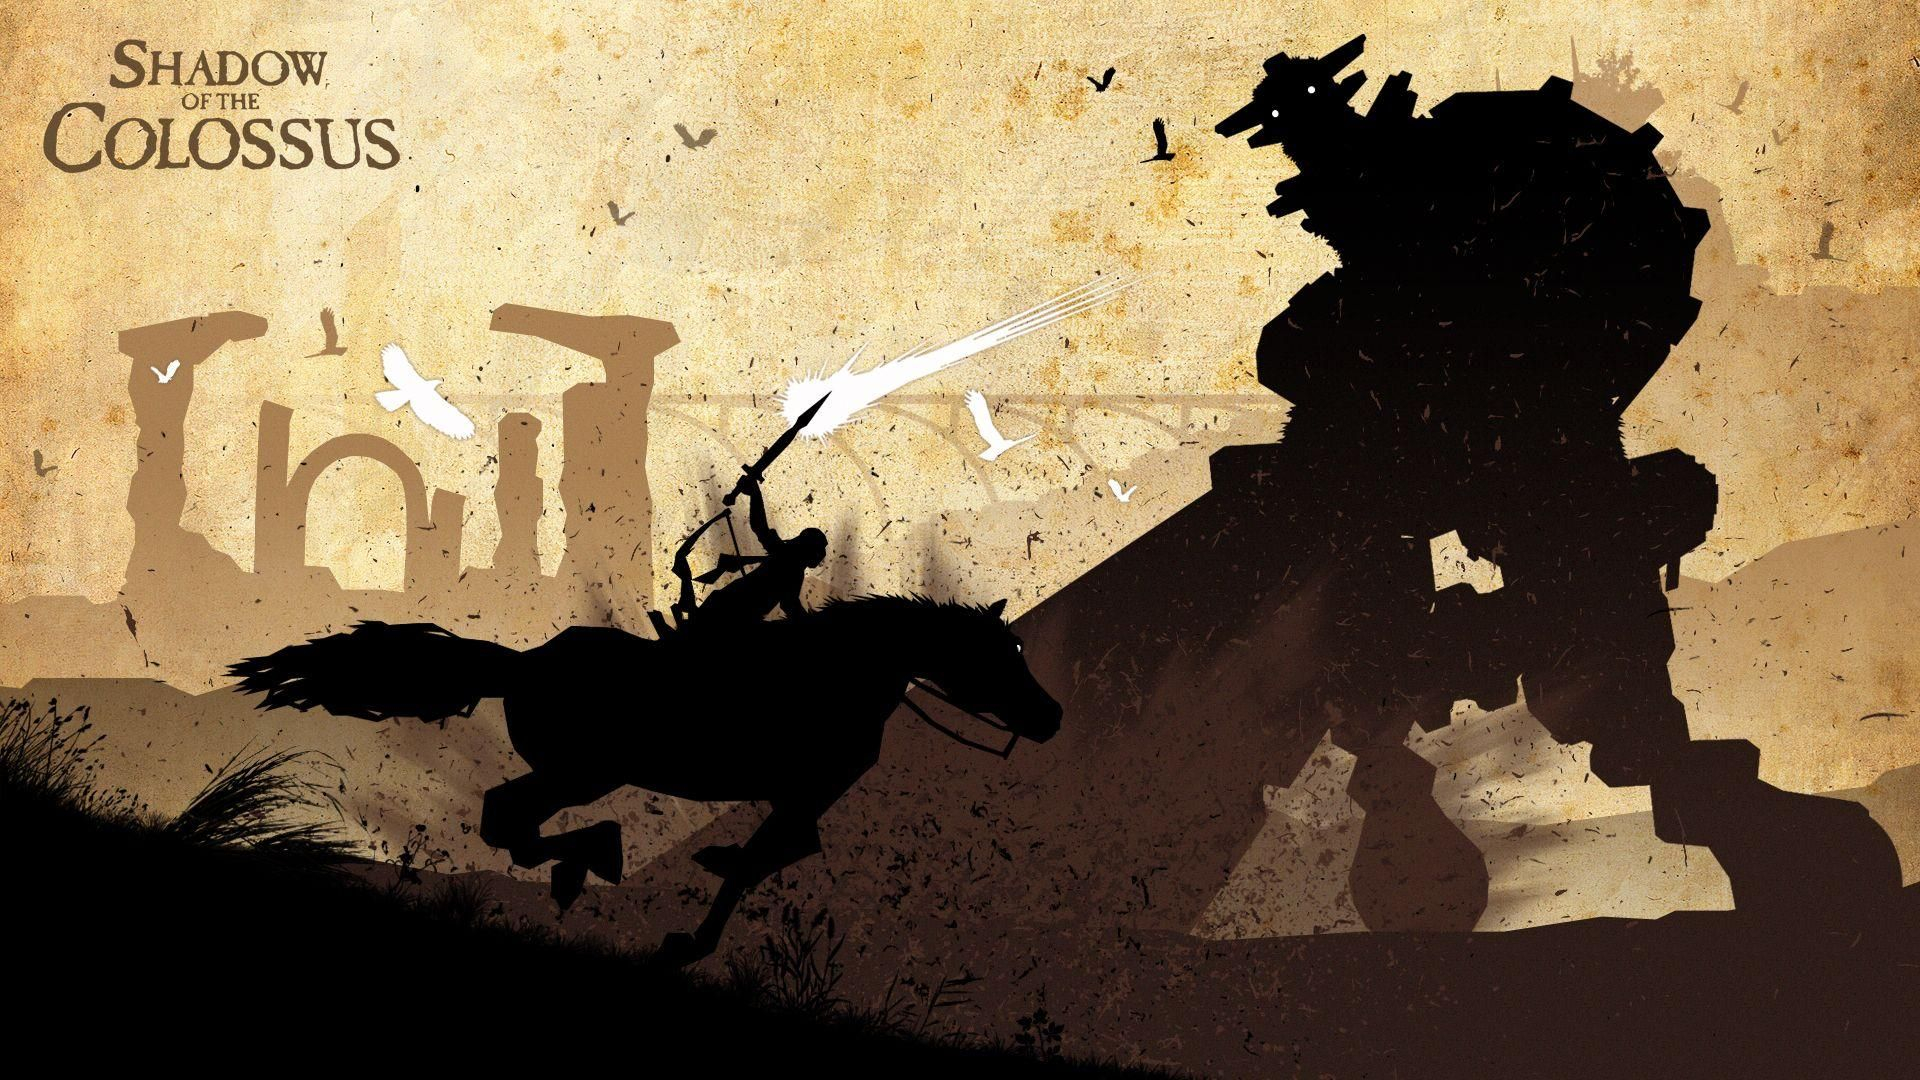 1920x1080 Check the best collection of Shadow Of The Colossus Wallpaper HD for desktop, laptop, tablet and mobile device. You can download them free